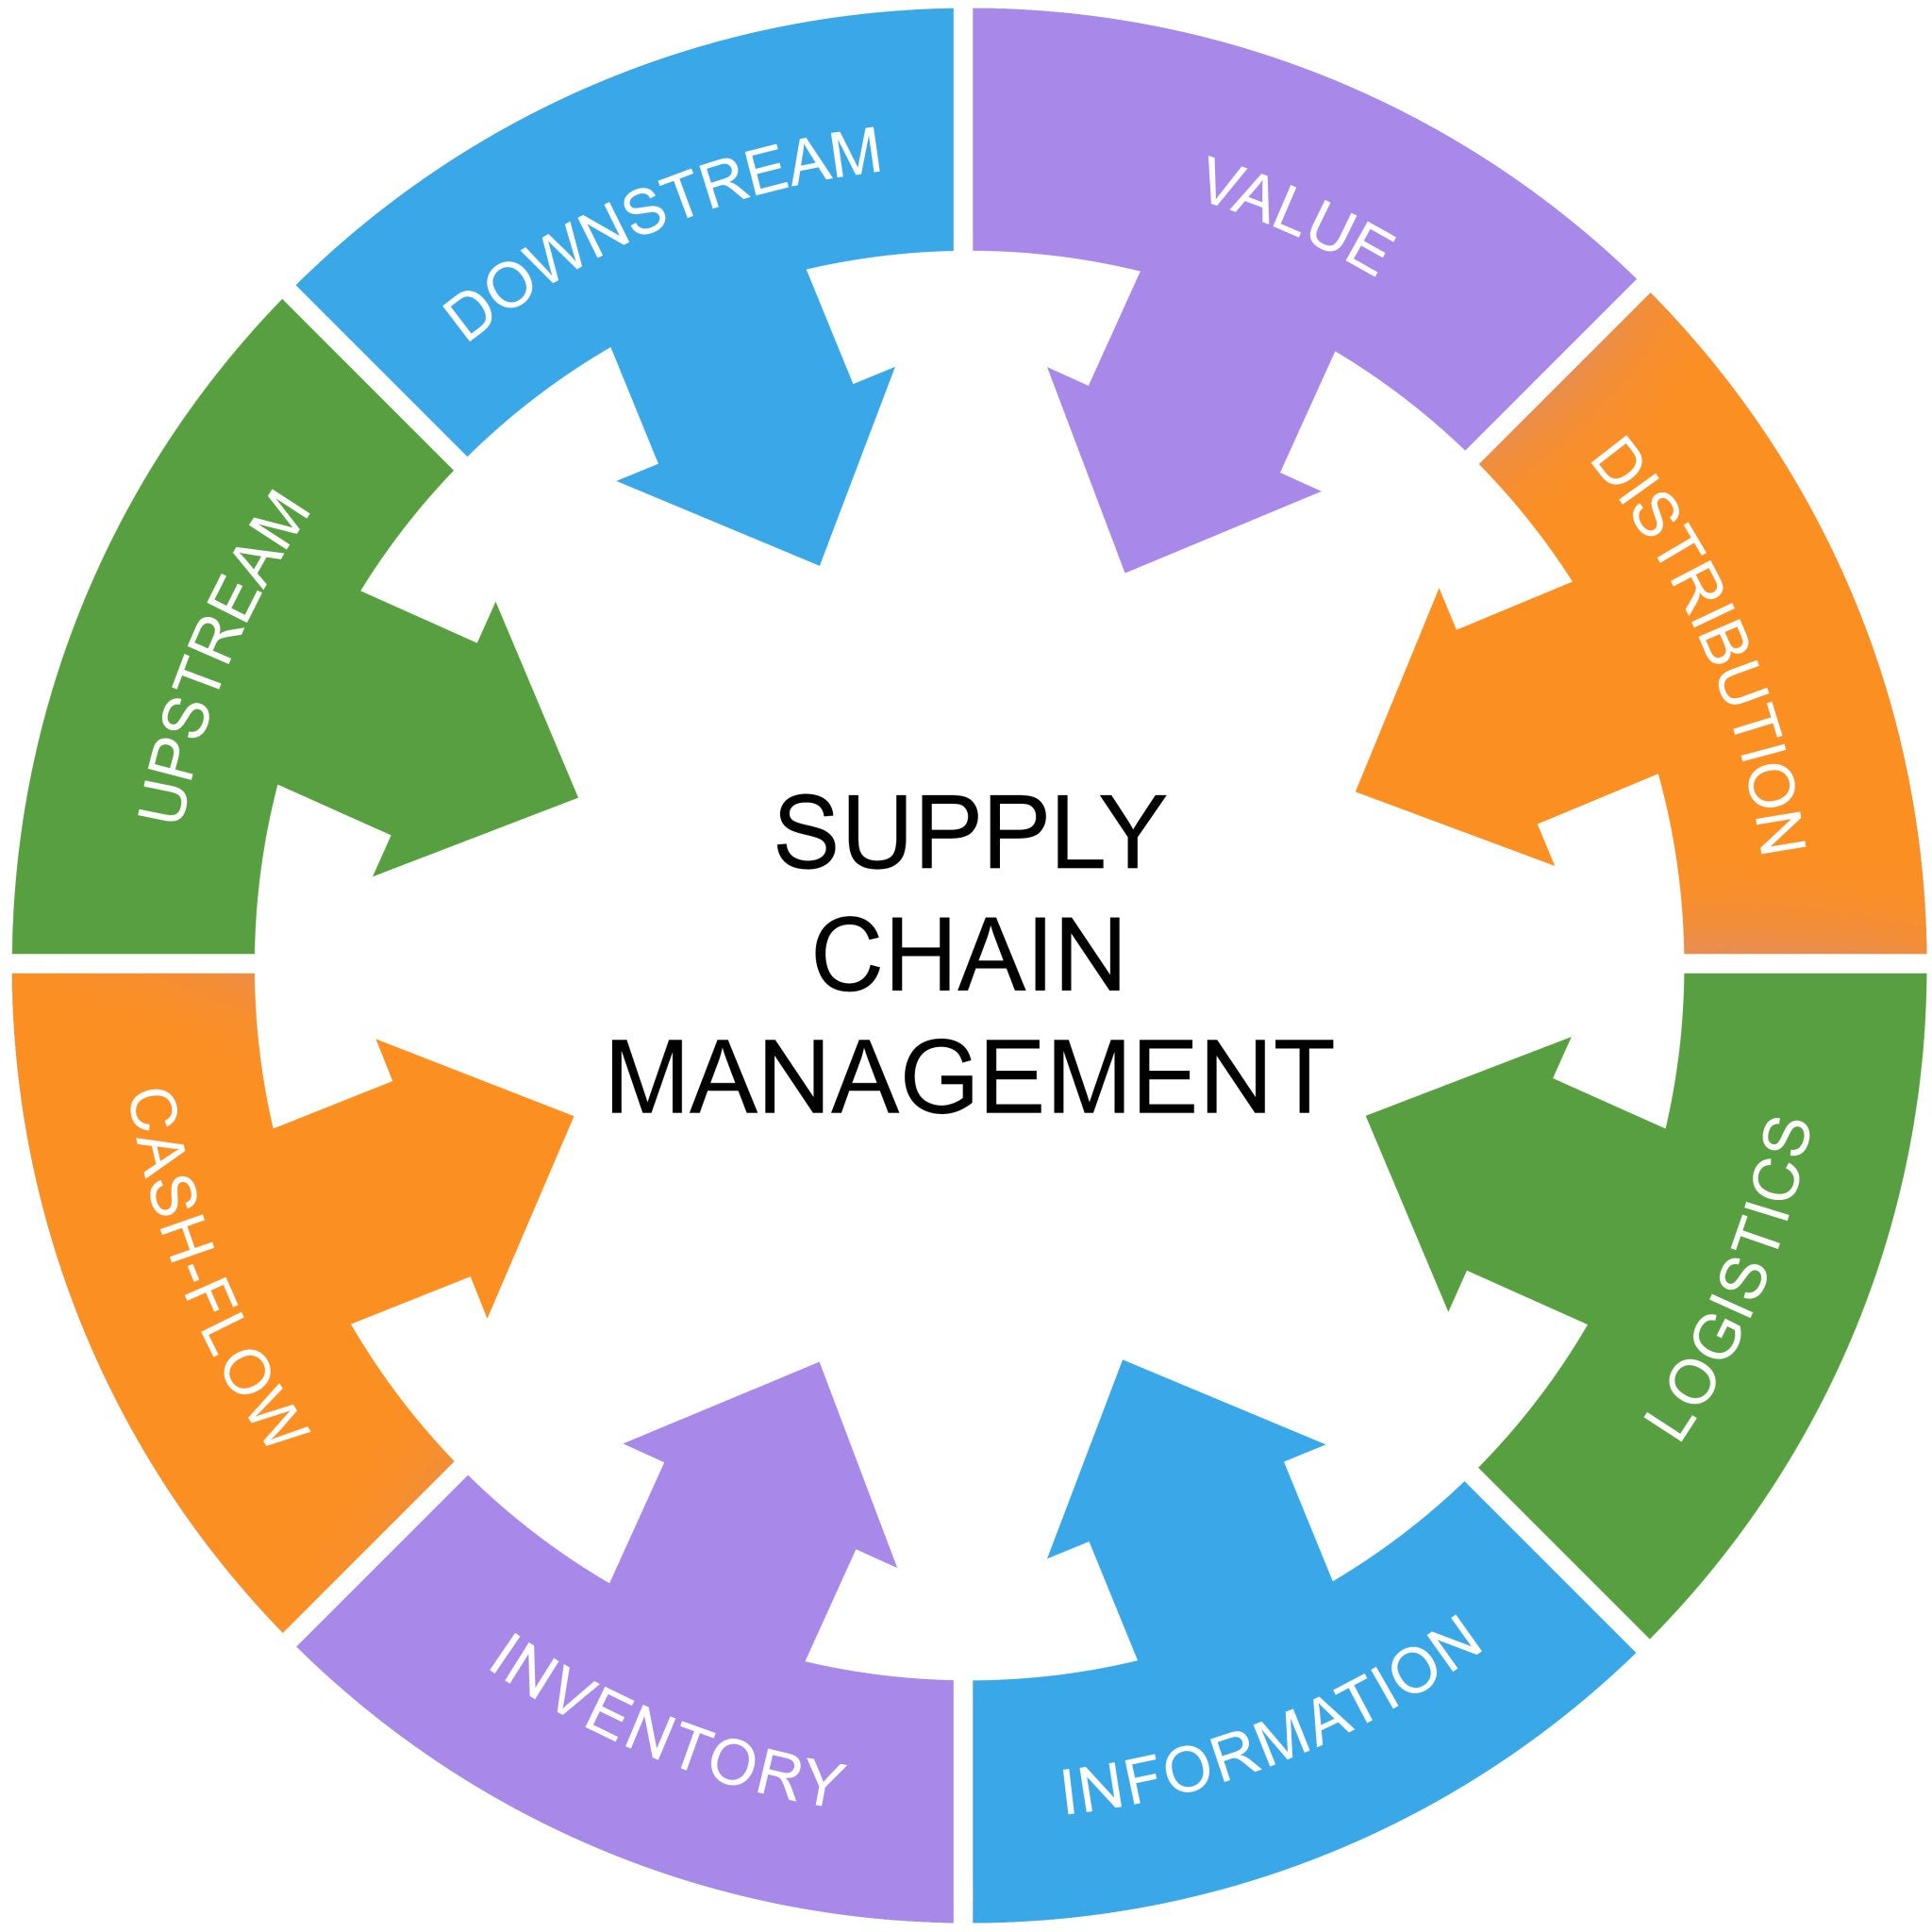 Do you know the eight principles of supply chain management?